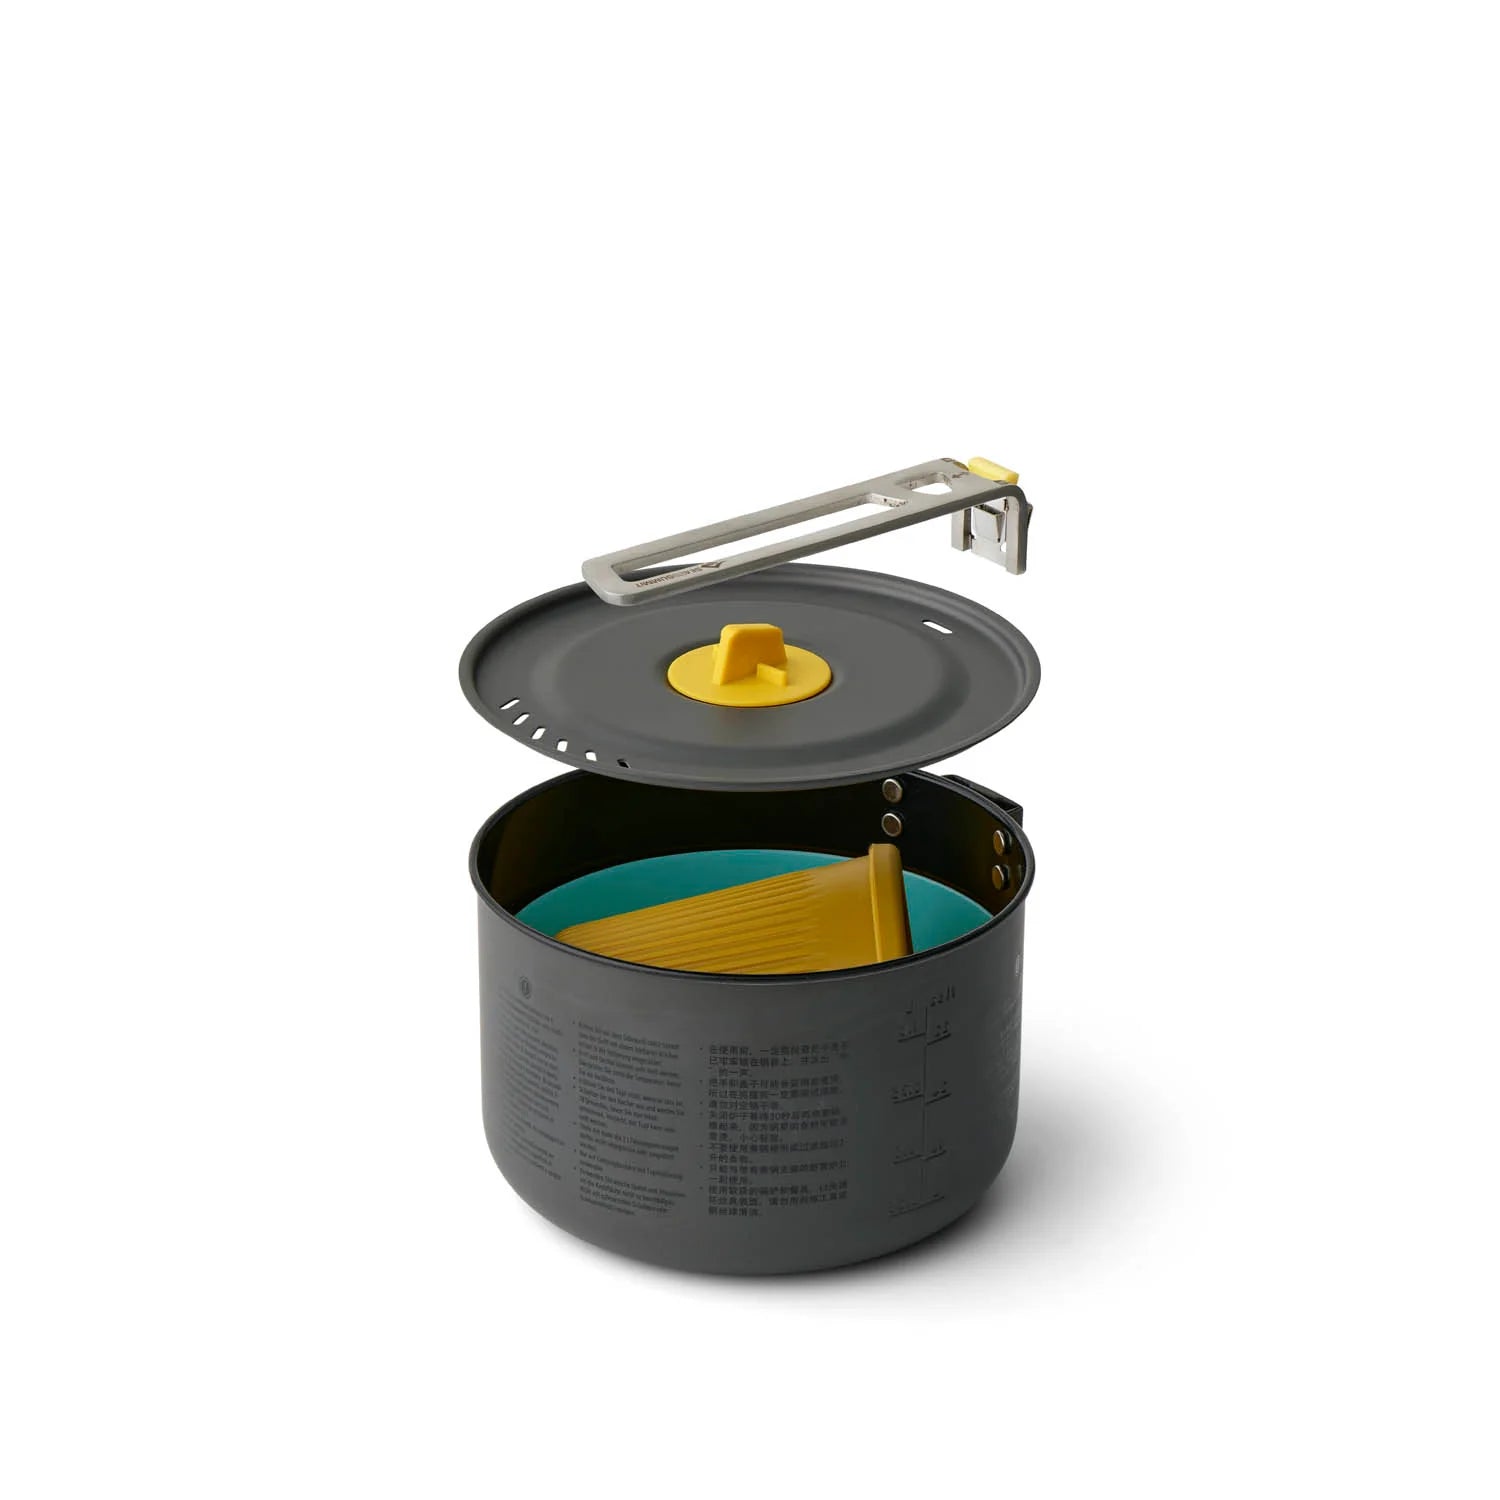 Sea to Summit Frontier UL One Pot Cook Set - 5 Piece -  - Mansfield Hunting & Fishing - Products to prepare for Corona Virus